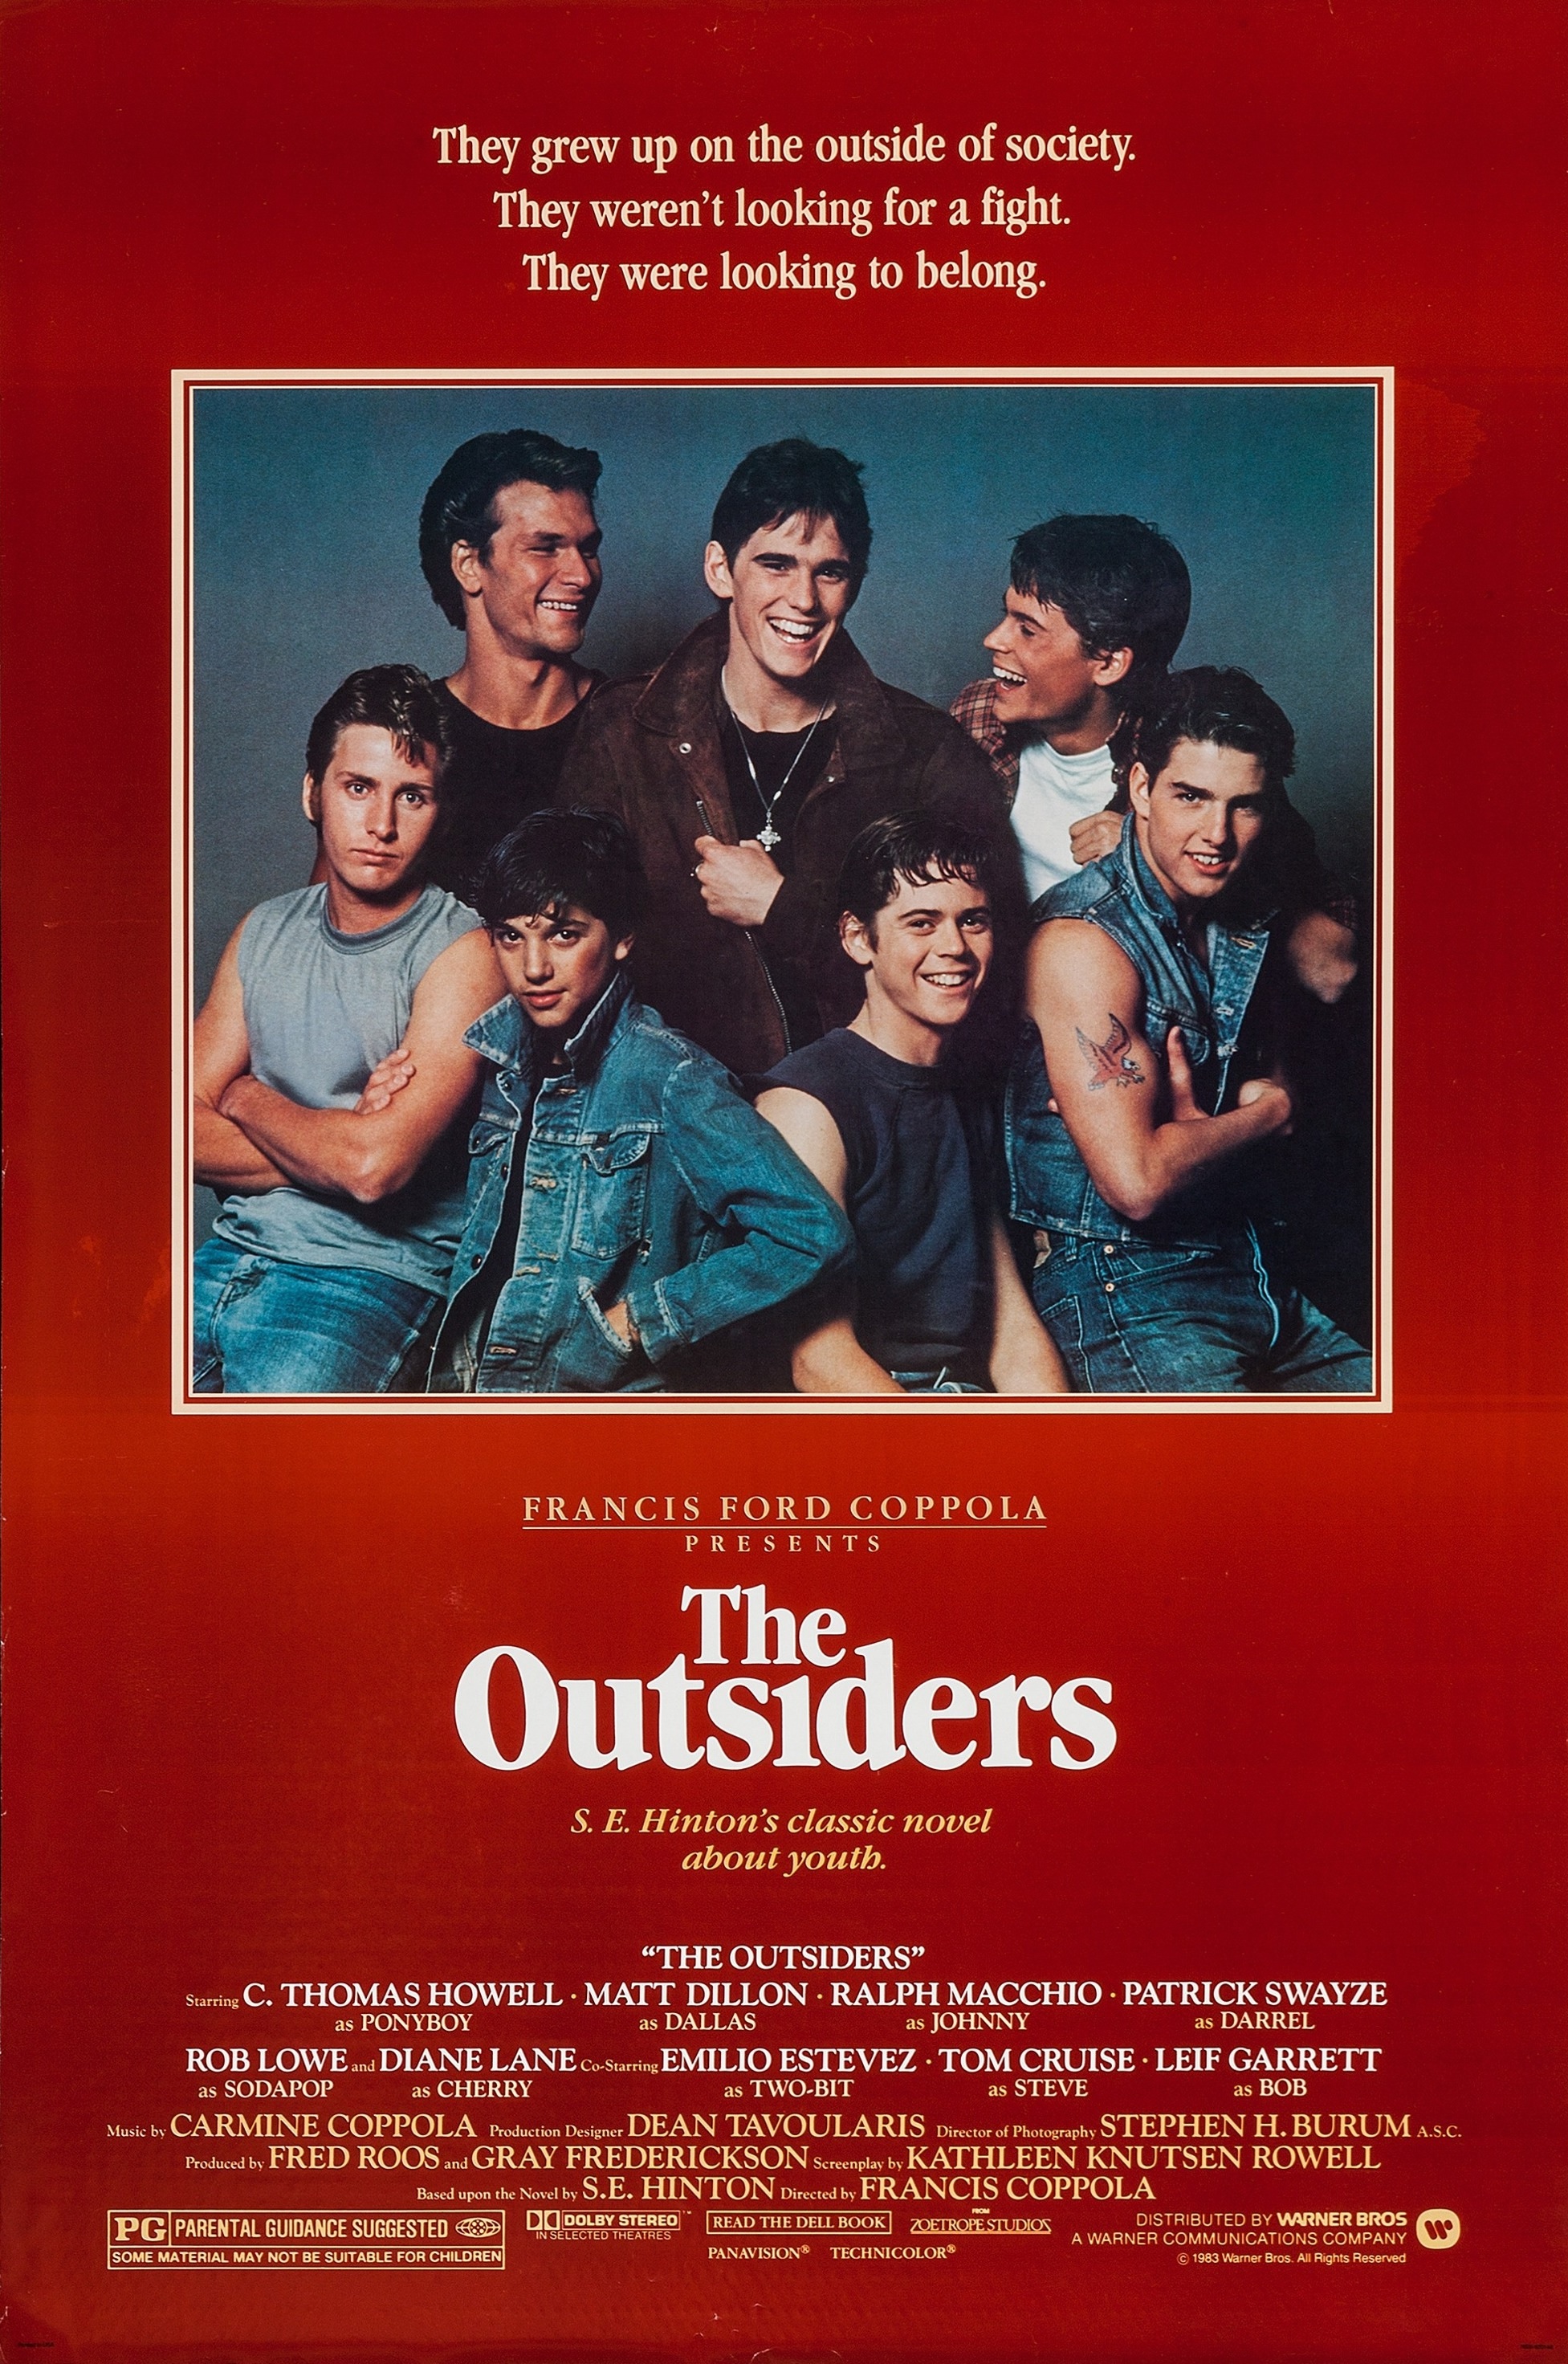 The Outsiders (film) Warner Bros picture